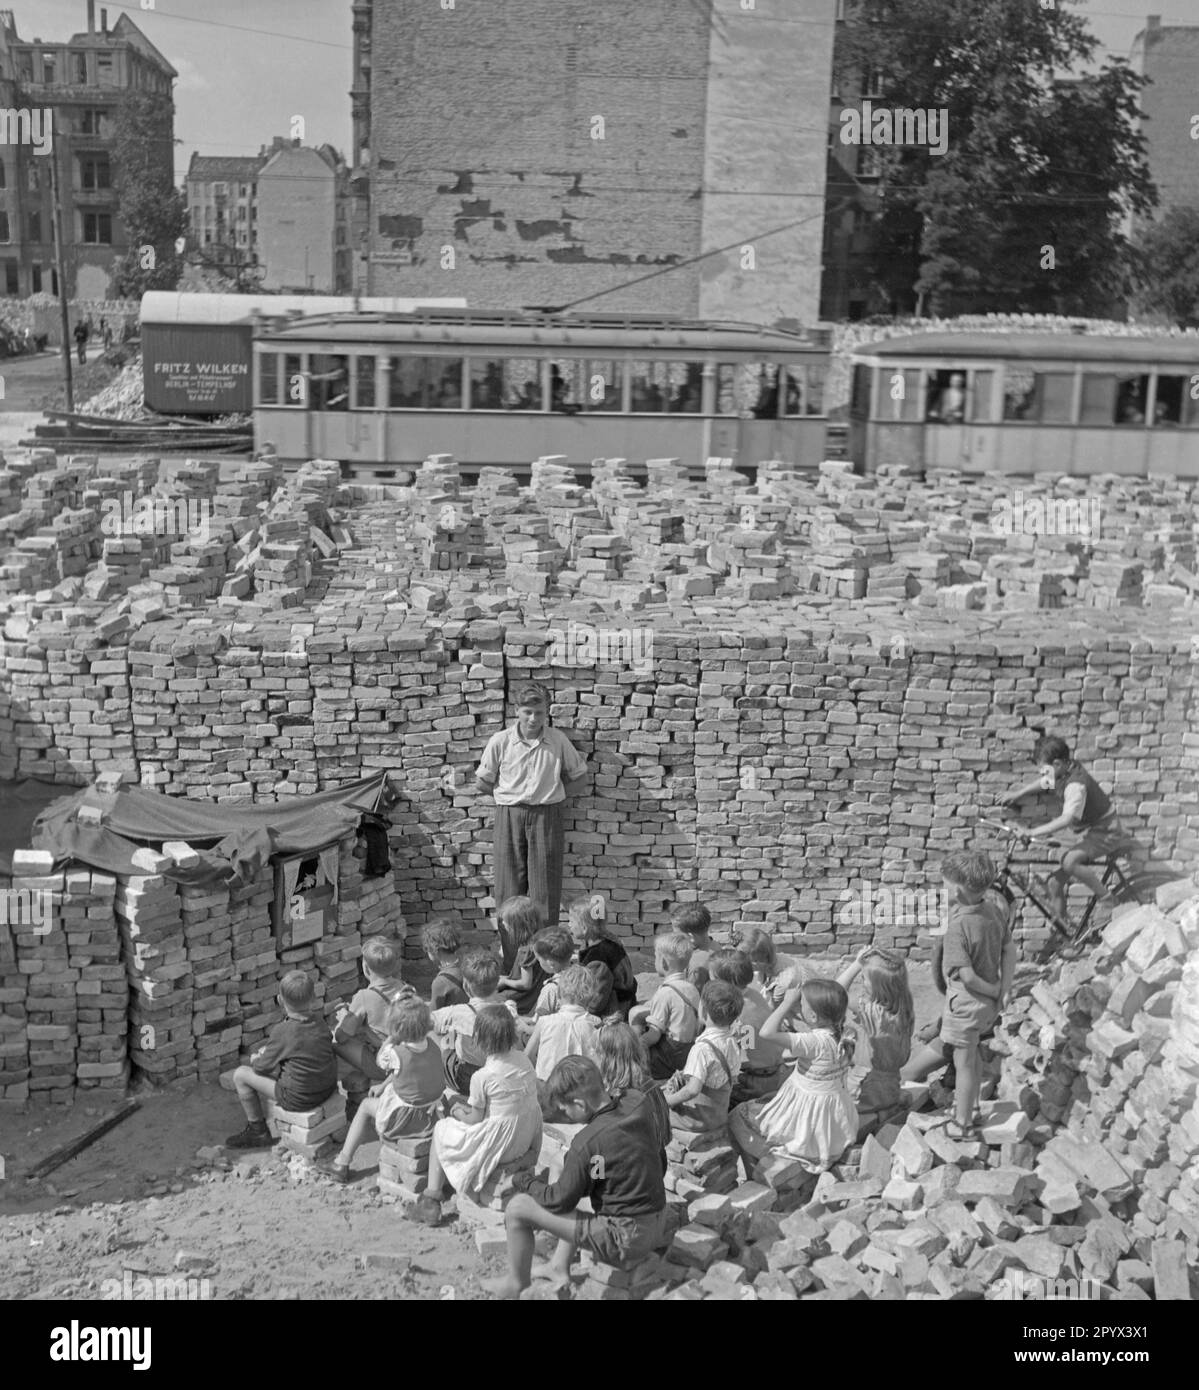 Undated photo of a group of children watching a puppet show among piles of bricks remnant from the ruins. Bricks serve as curtain of the puppet theater. In the background, more brick stacks, a passing street car and partly destroyed houses by bombing. Stock Photo